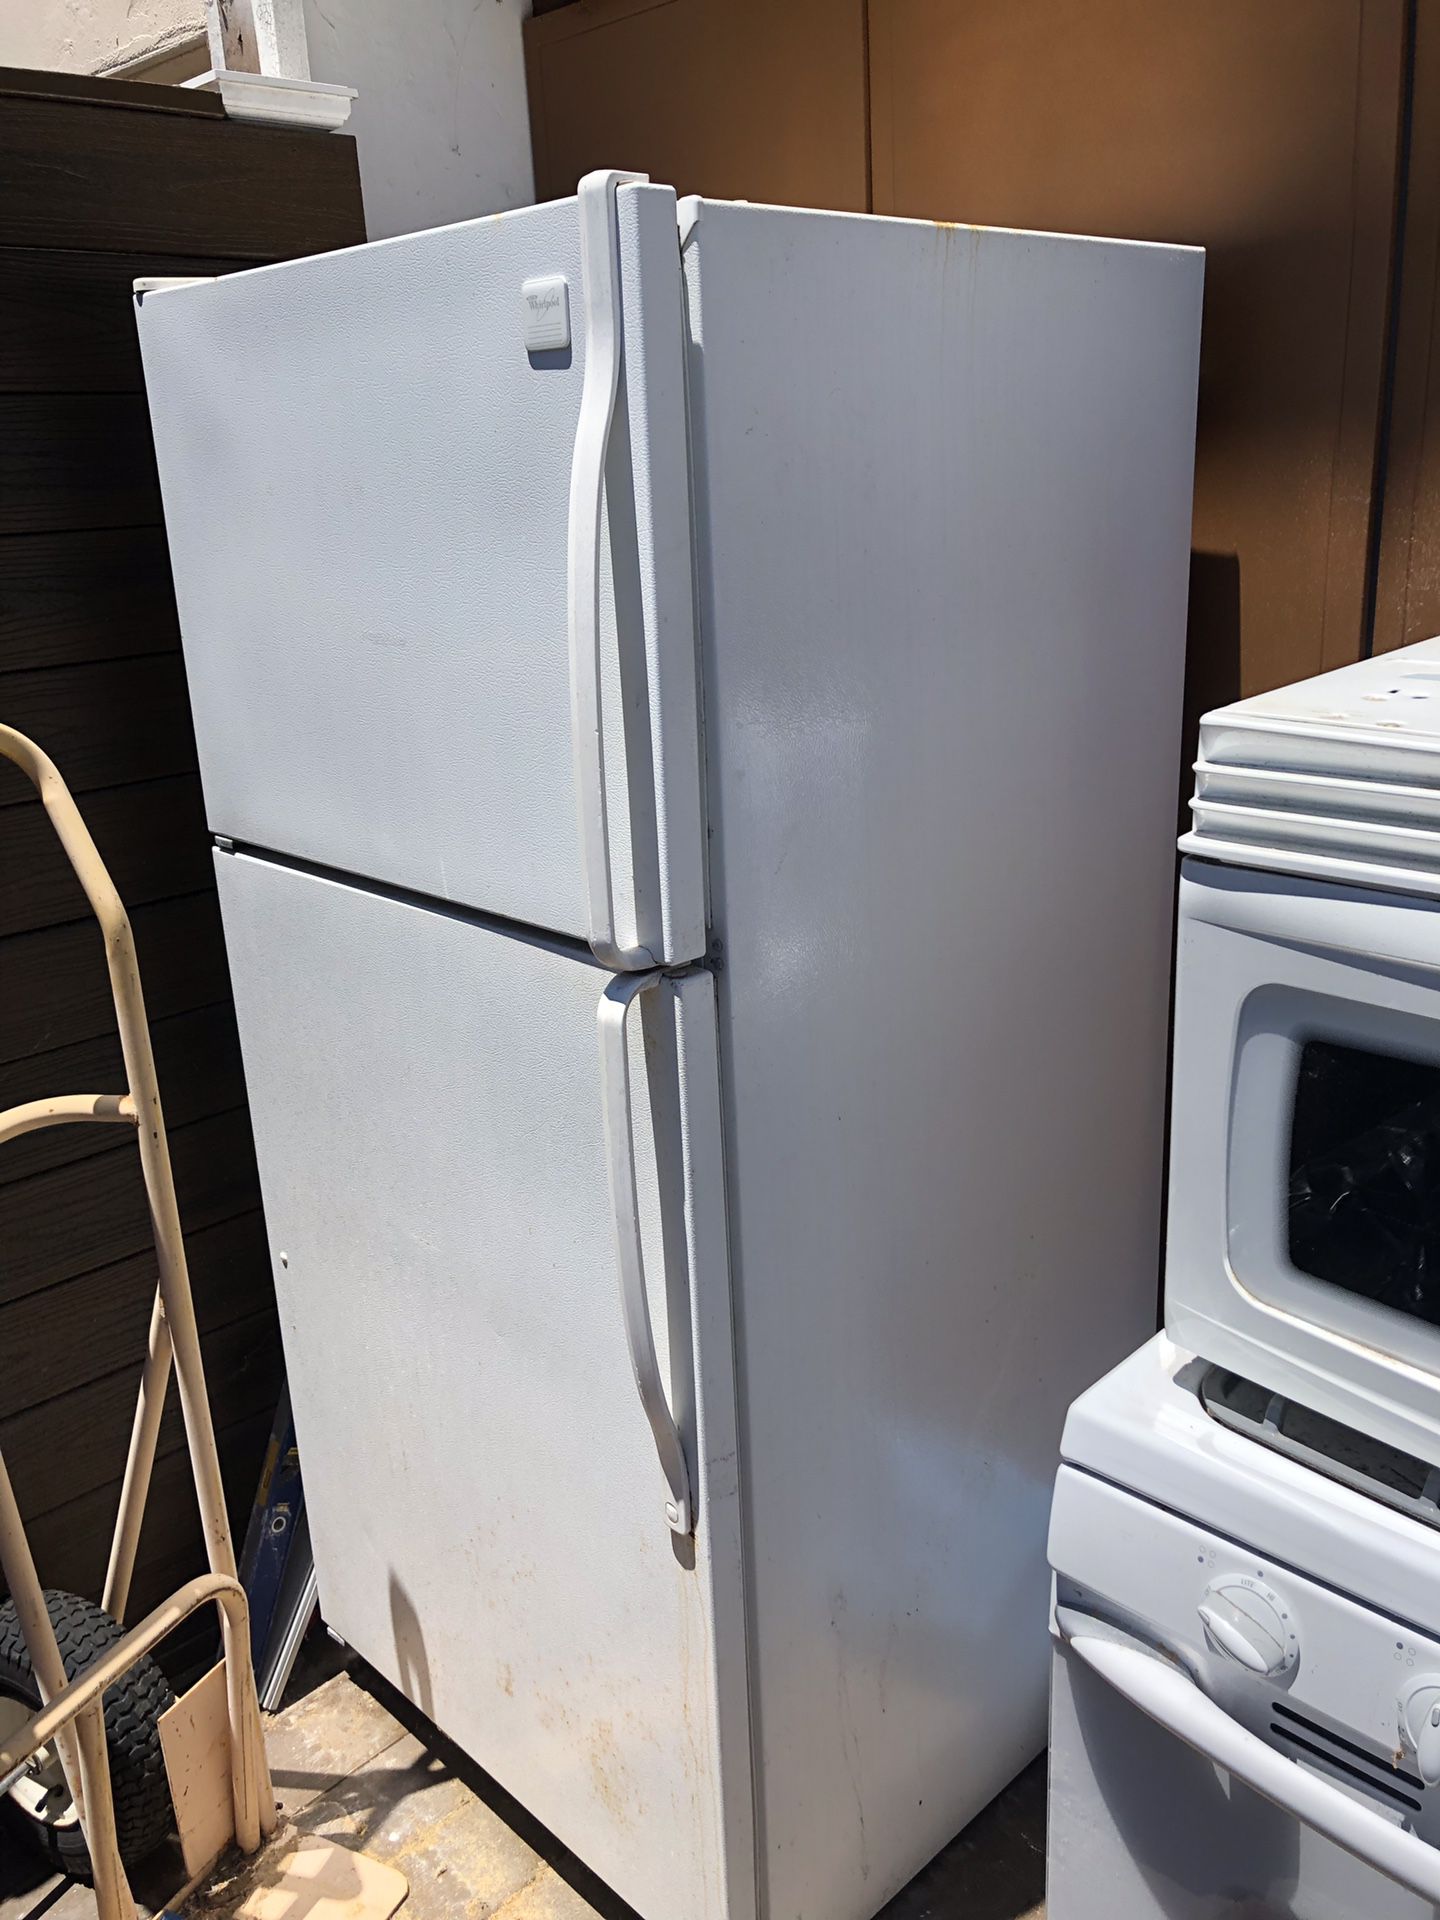 FREE REFRIGERATOR ,STOVE AND MICROWAVE IN WORKING CONDITION